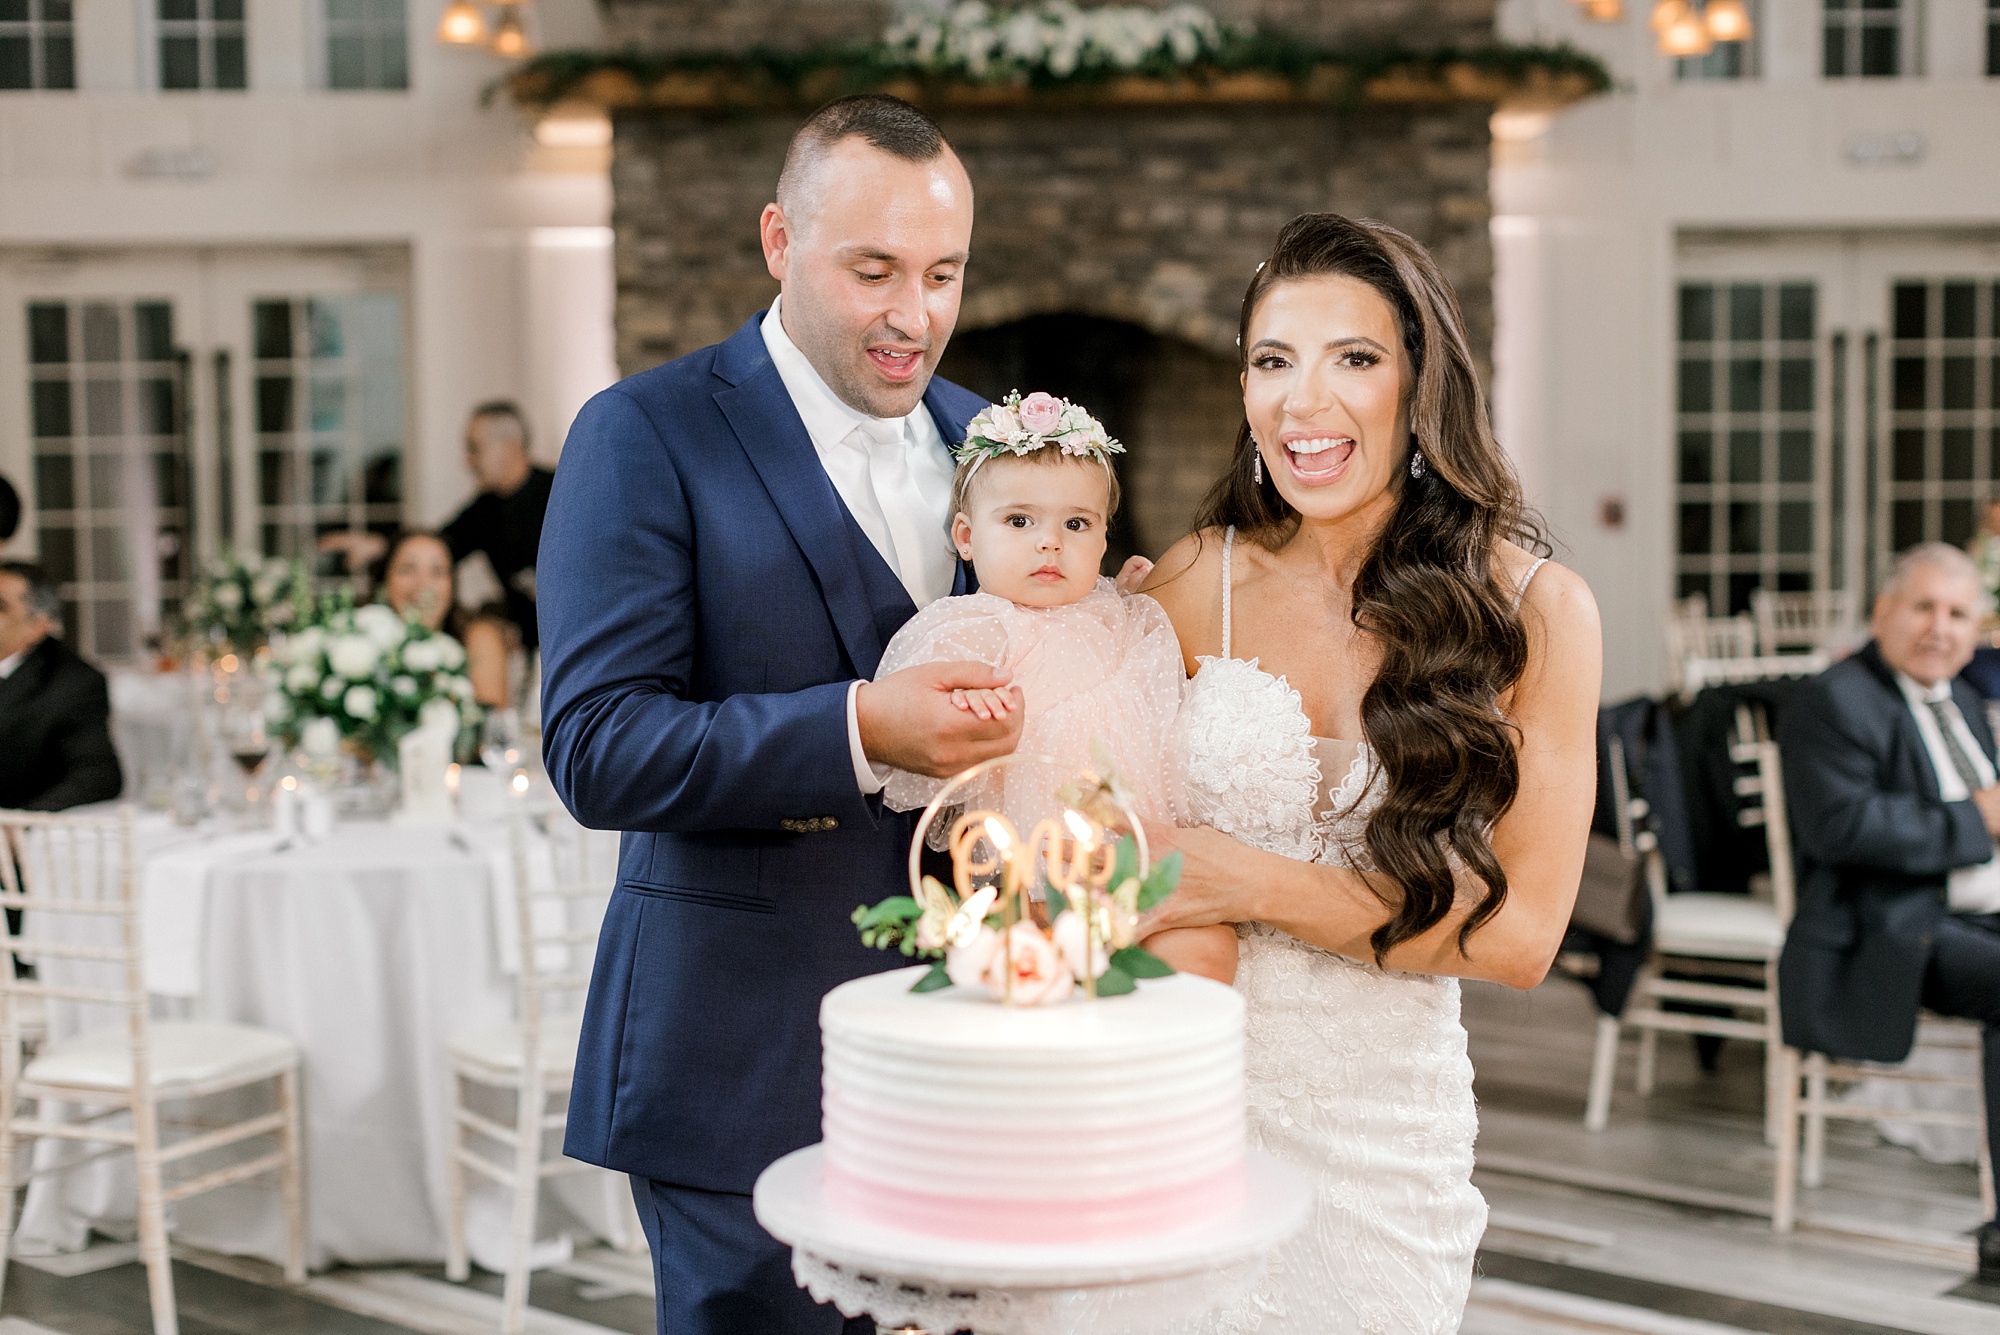 bride and groom pose with one year old daughter to cut wedding cake at wedding reception at Ryland Inn